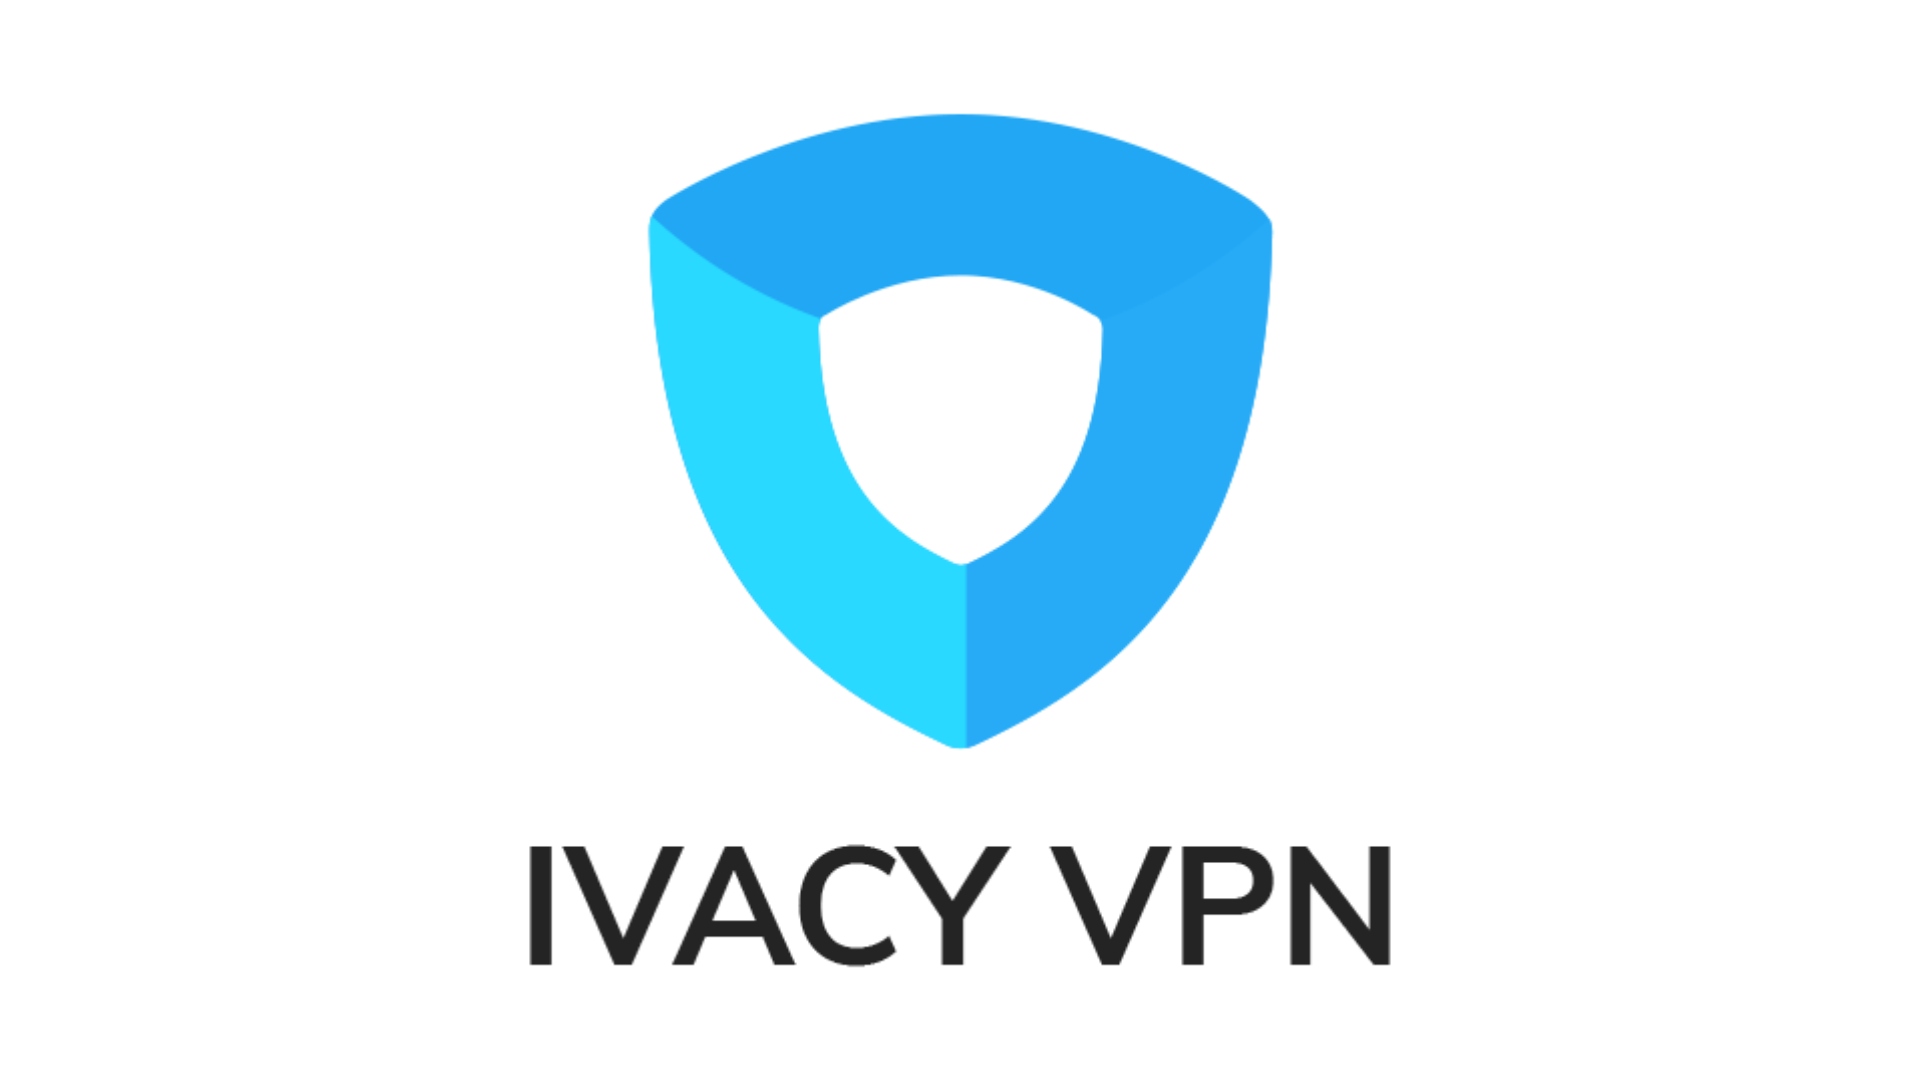 Best Peacock VPN: Ivacy VPN. Image shows the company logo.